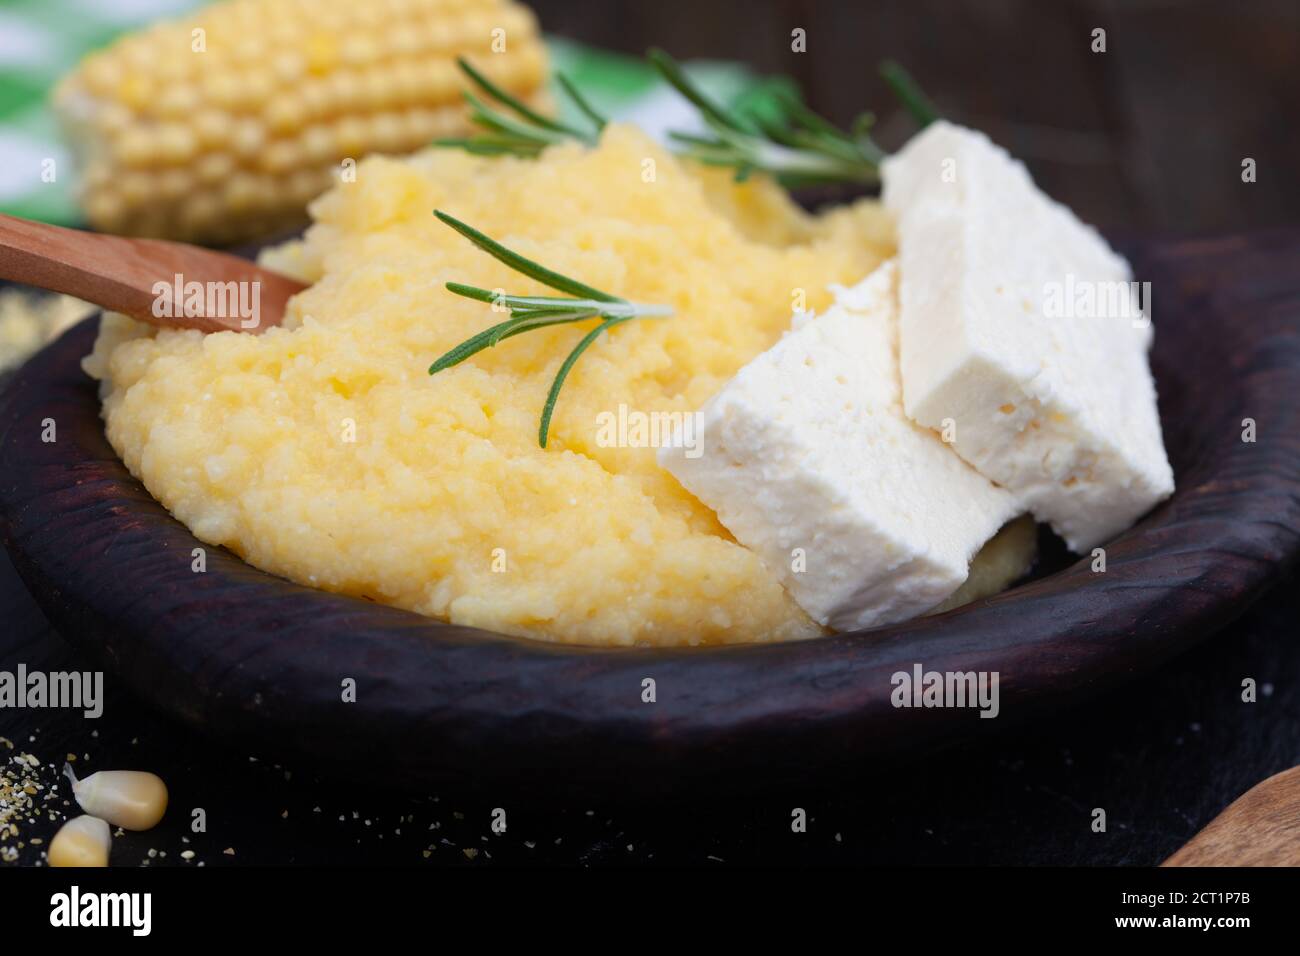 Mamaliga or polenta porridge made out of yellow maize flour. Homemade palenta with cheese, traditional meal on Balkan. Stock Photo